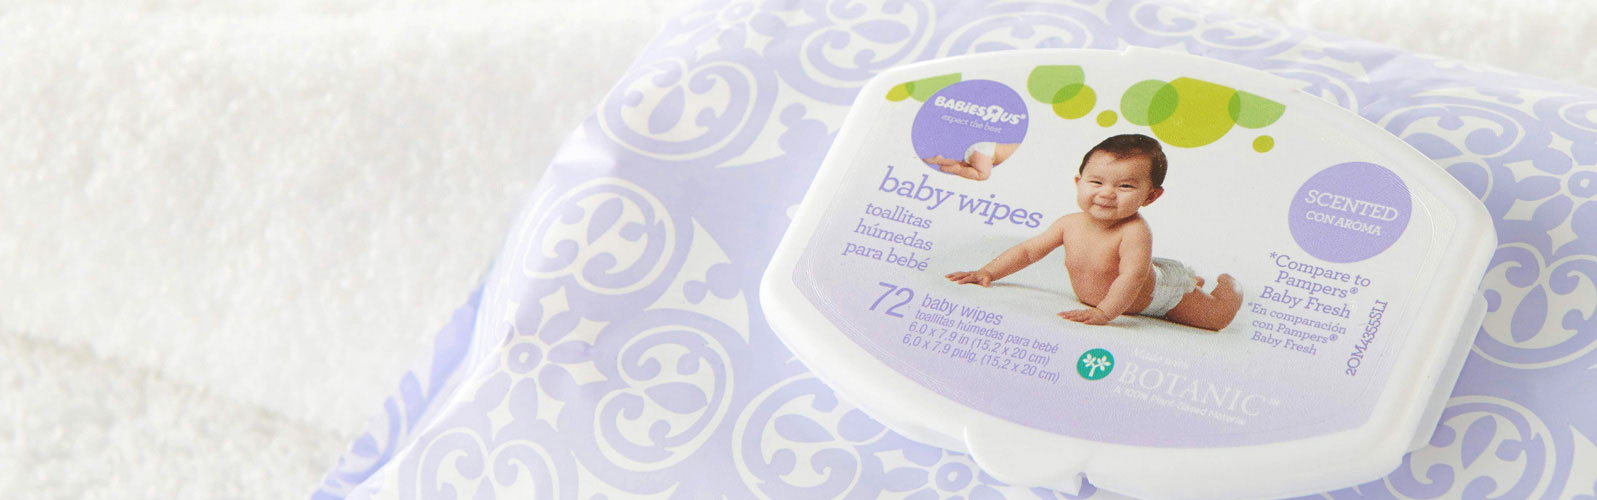 Baby wipes flexible packaging IML closure by Inland